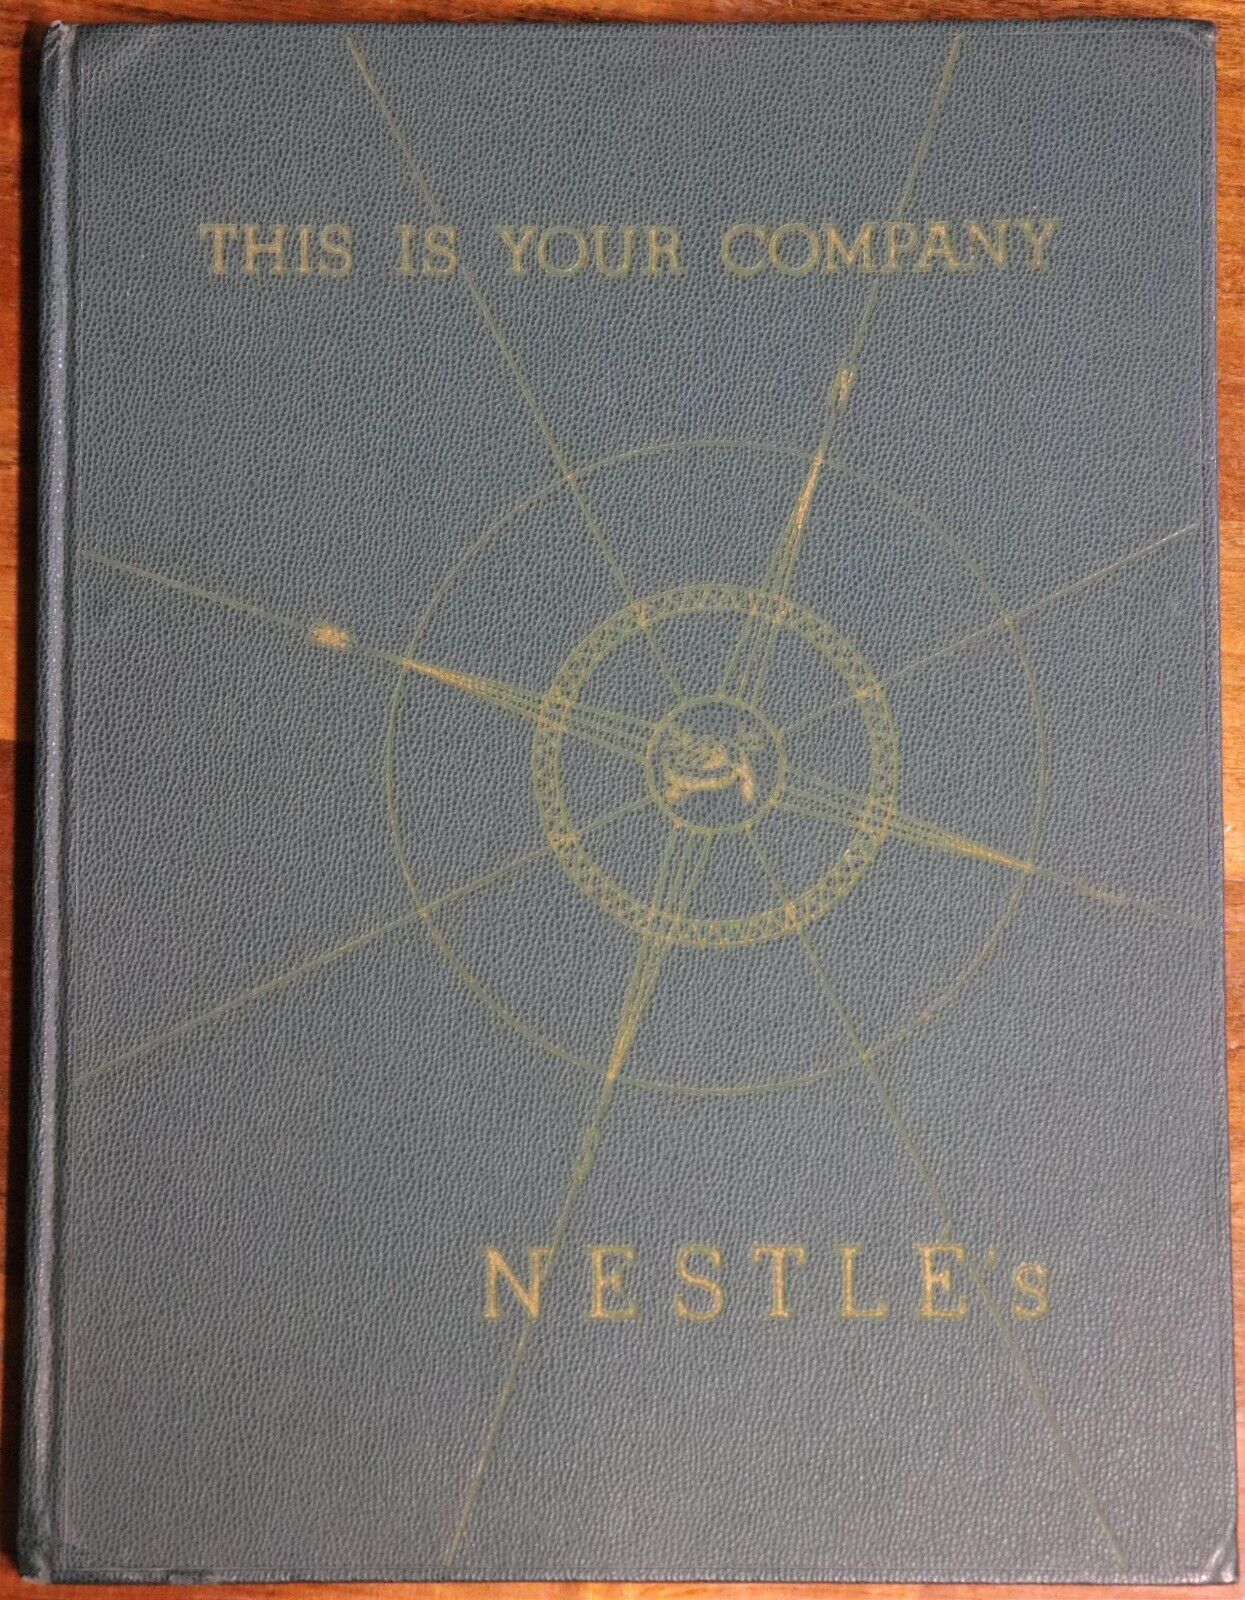 Nestle: This Is Your Company - 1946 - USA History First Edition Business Book